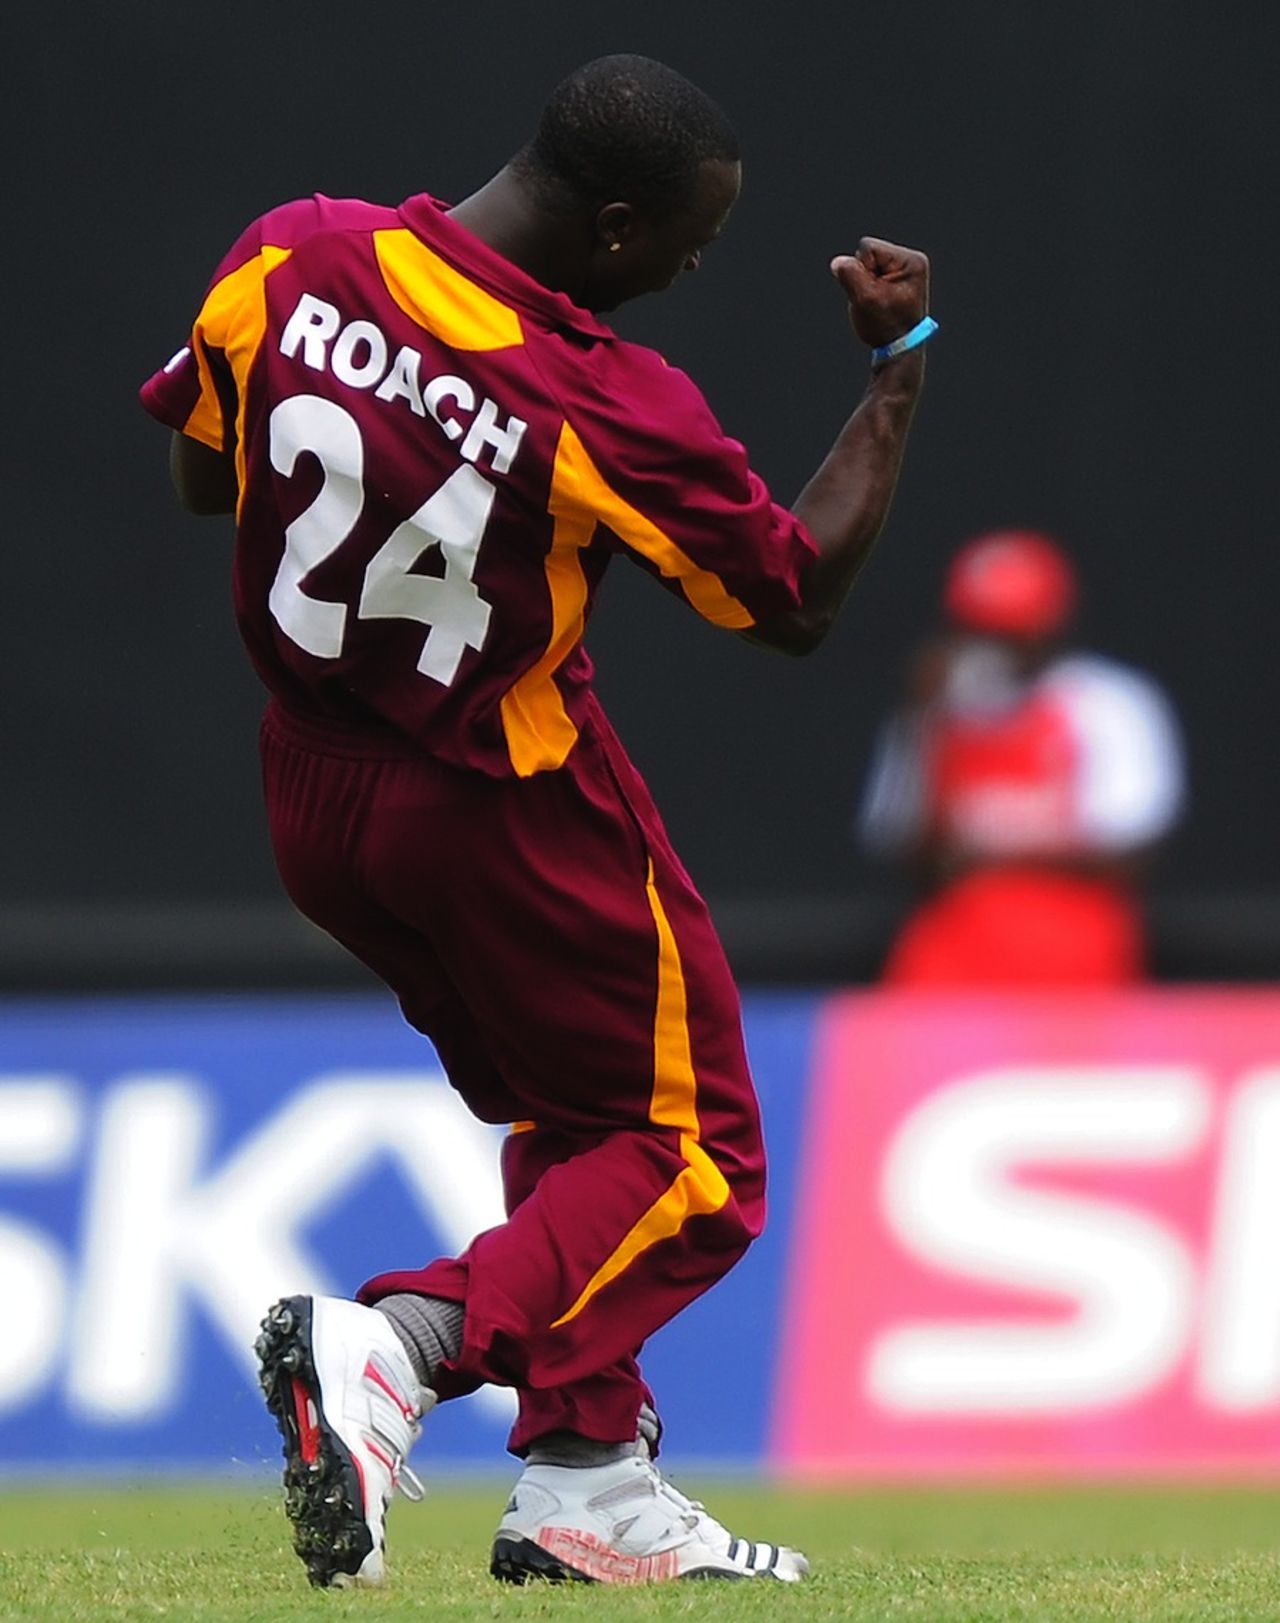 Kemar Roach took 2 for 33 in ten overs, West Indies v Australia, 1st ODI, St Vincent, March 16, 2012